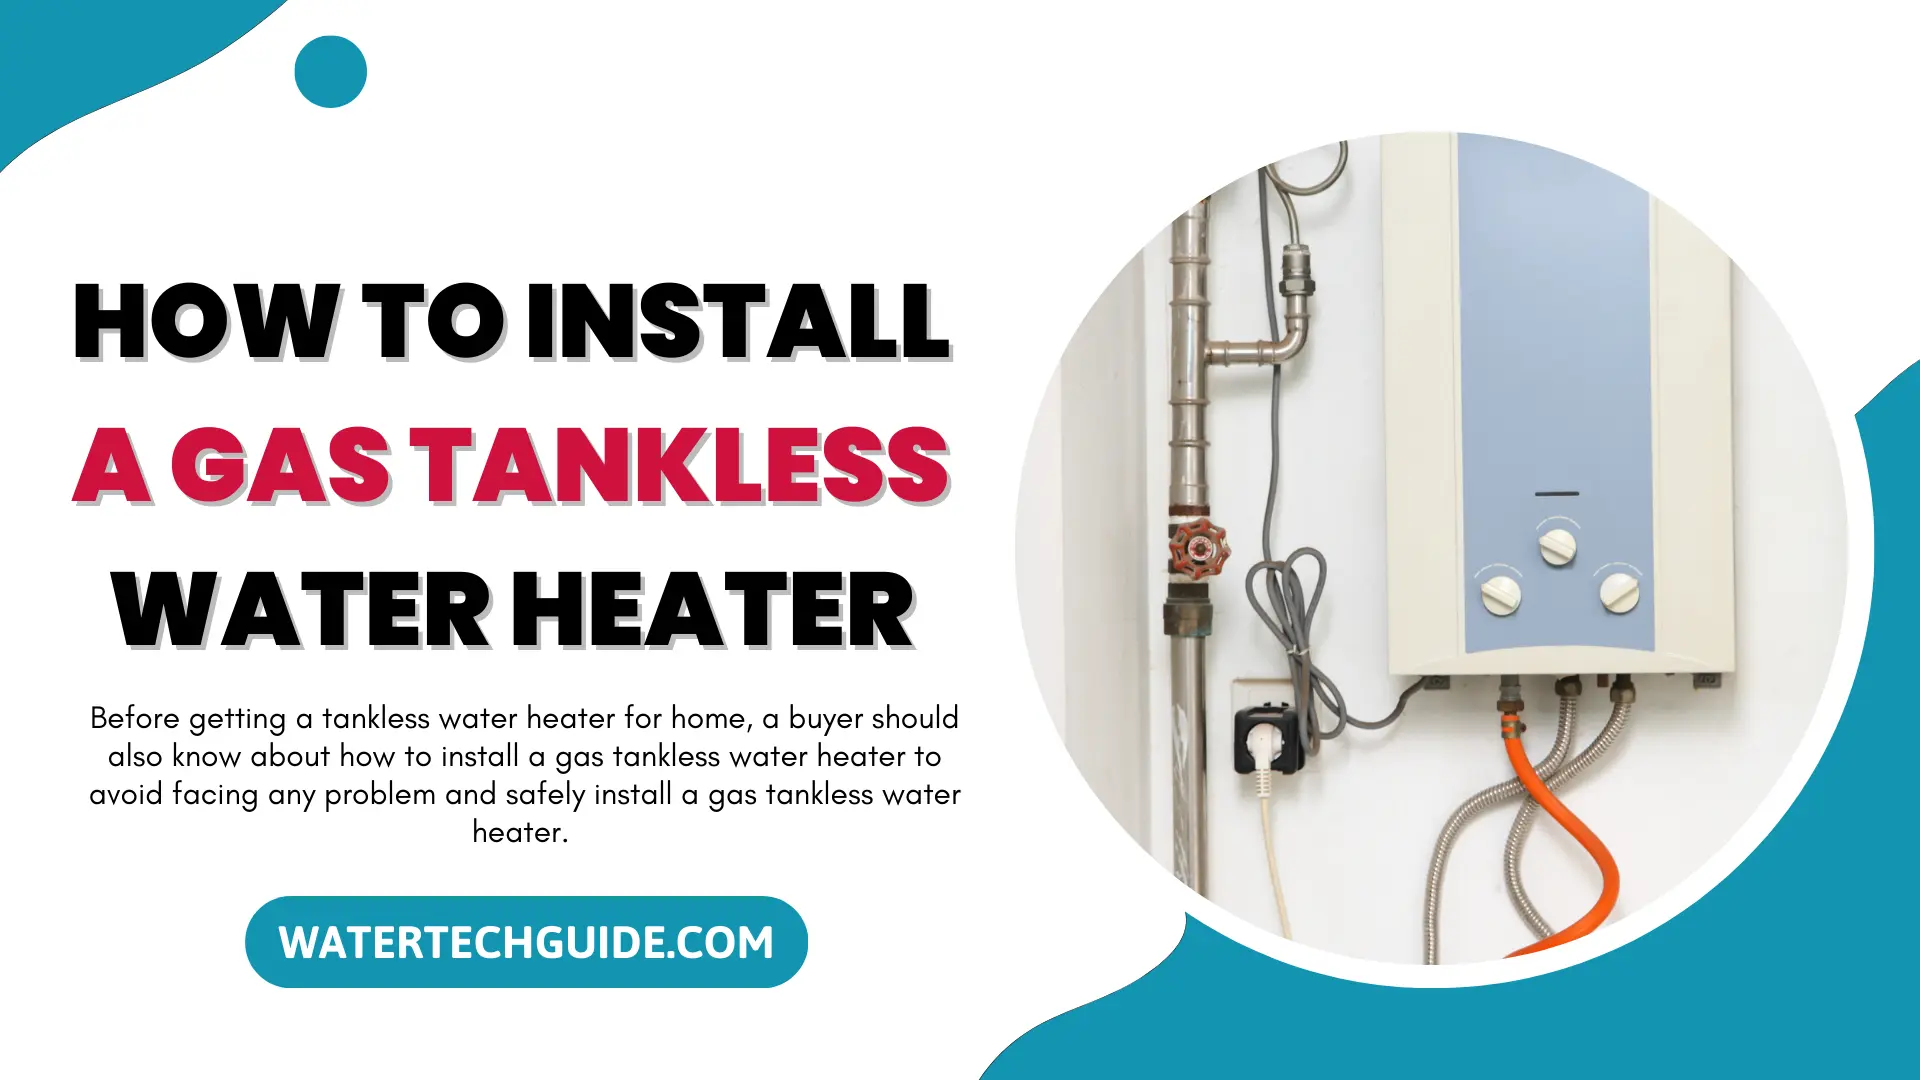 How to Install a Gas Tankless Water Heater